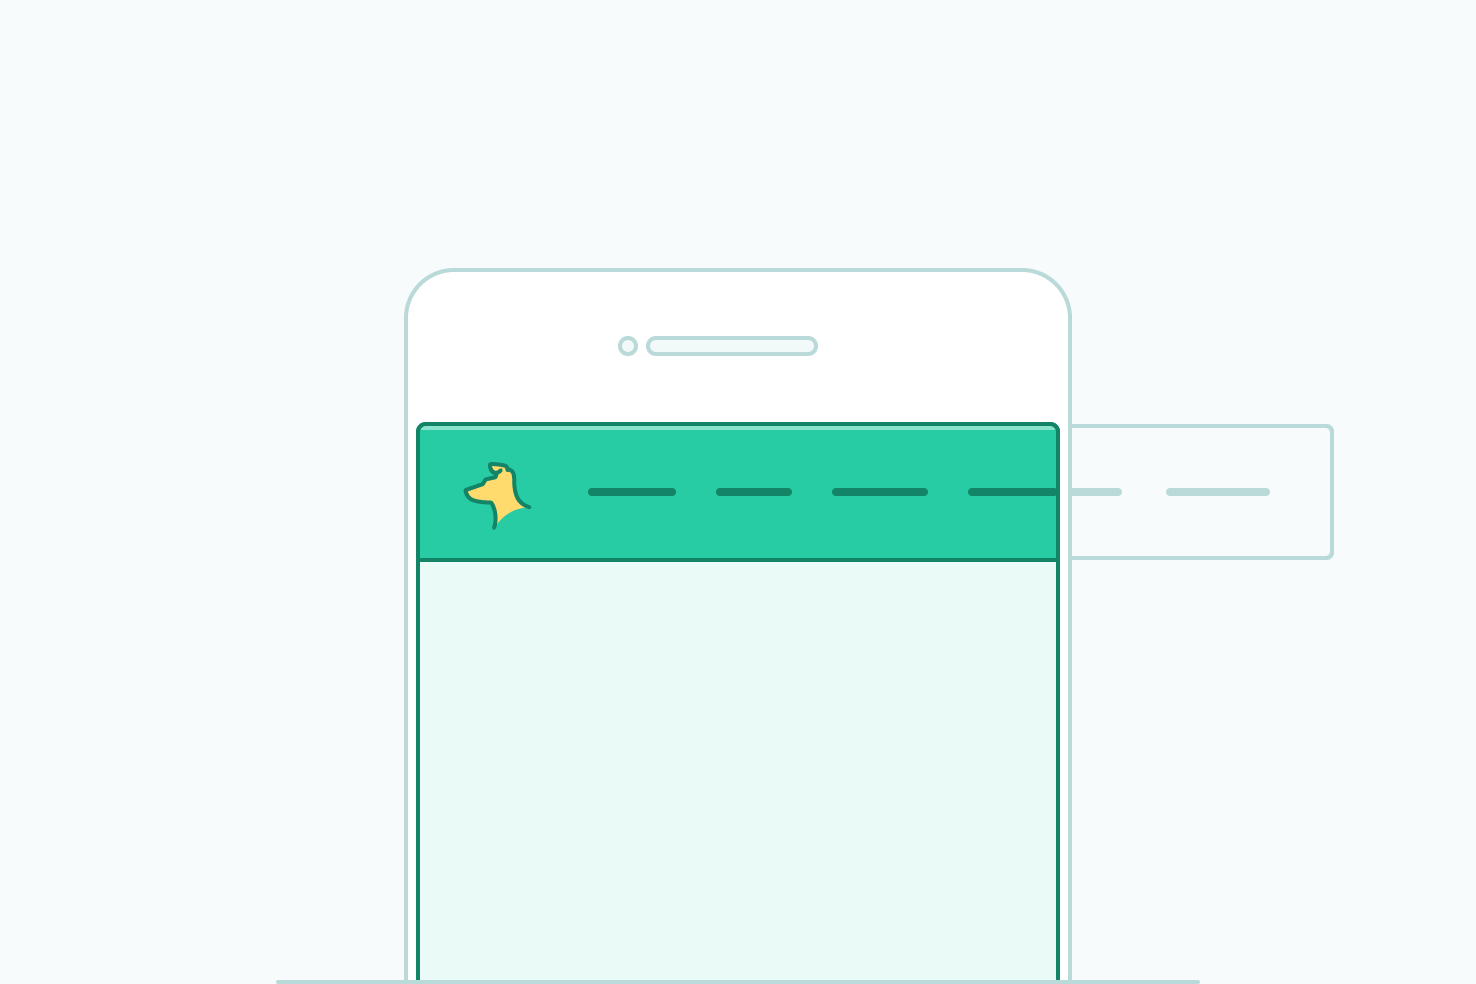 Simple horizontal scrolling menu with CSS